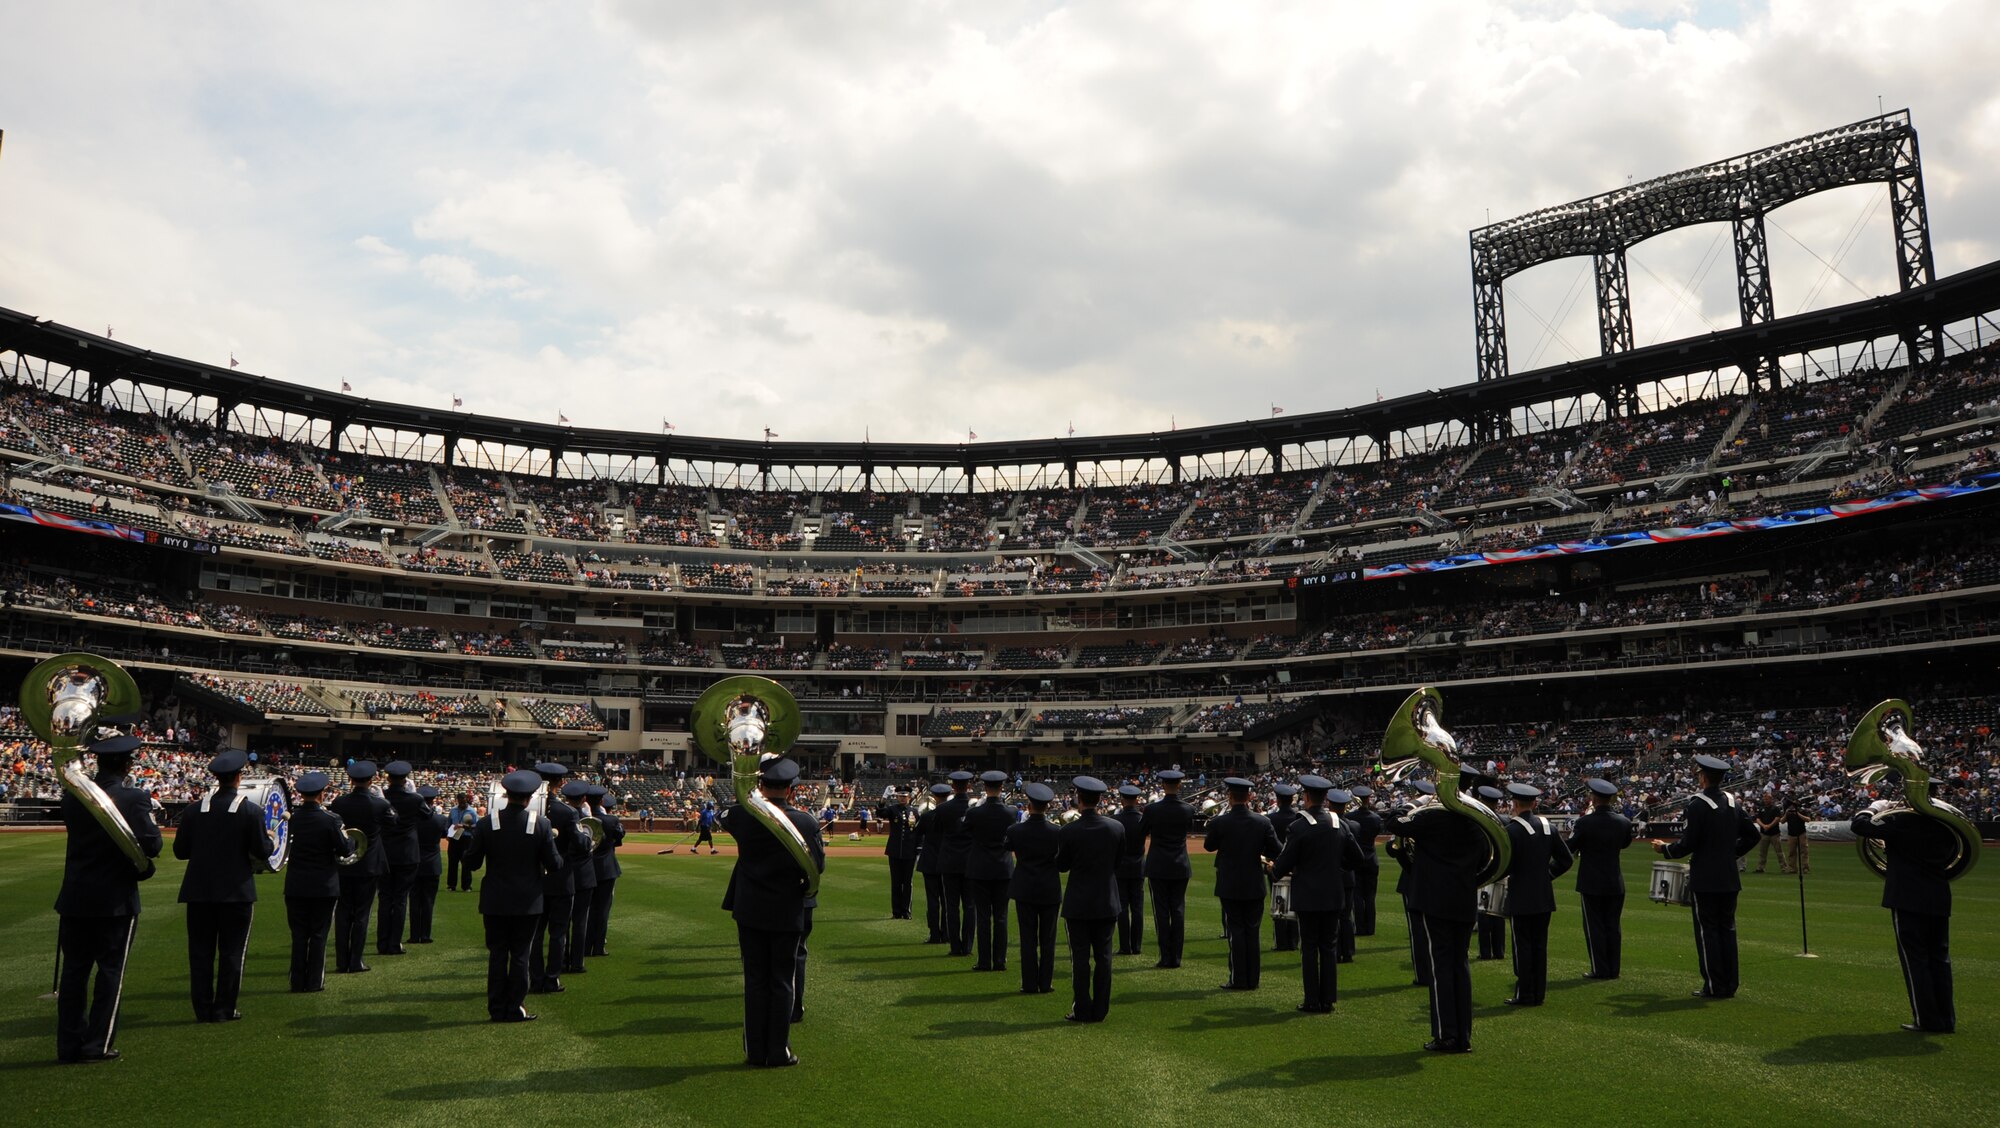 The U.S.  Air Force Band takes the outfield to inspire fans and perform the National Anthem before the Mets vs. Yankees baseball game at Citi Field July 2 in New York. The USAF Band was invited to perform before the opening pitch of the Mets vs. Yankees baseball game. (U.S. Air Force photo by Staff Sgt. Christopher Ruano)